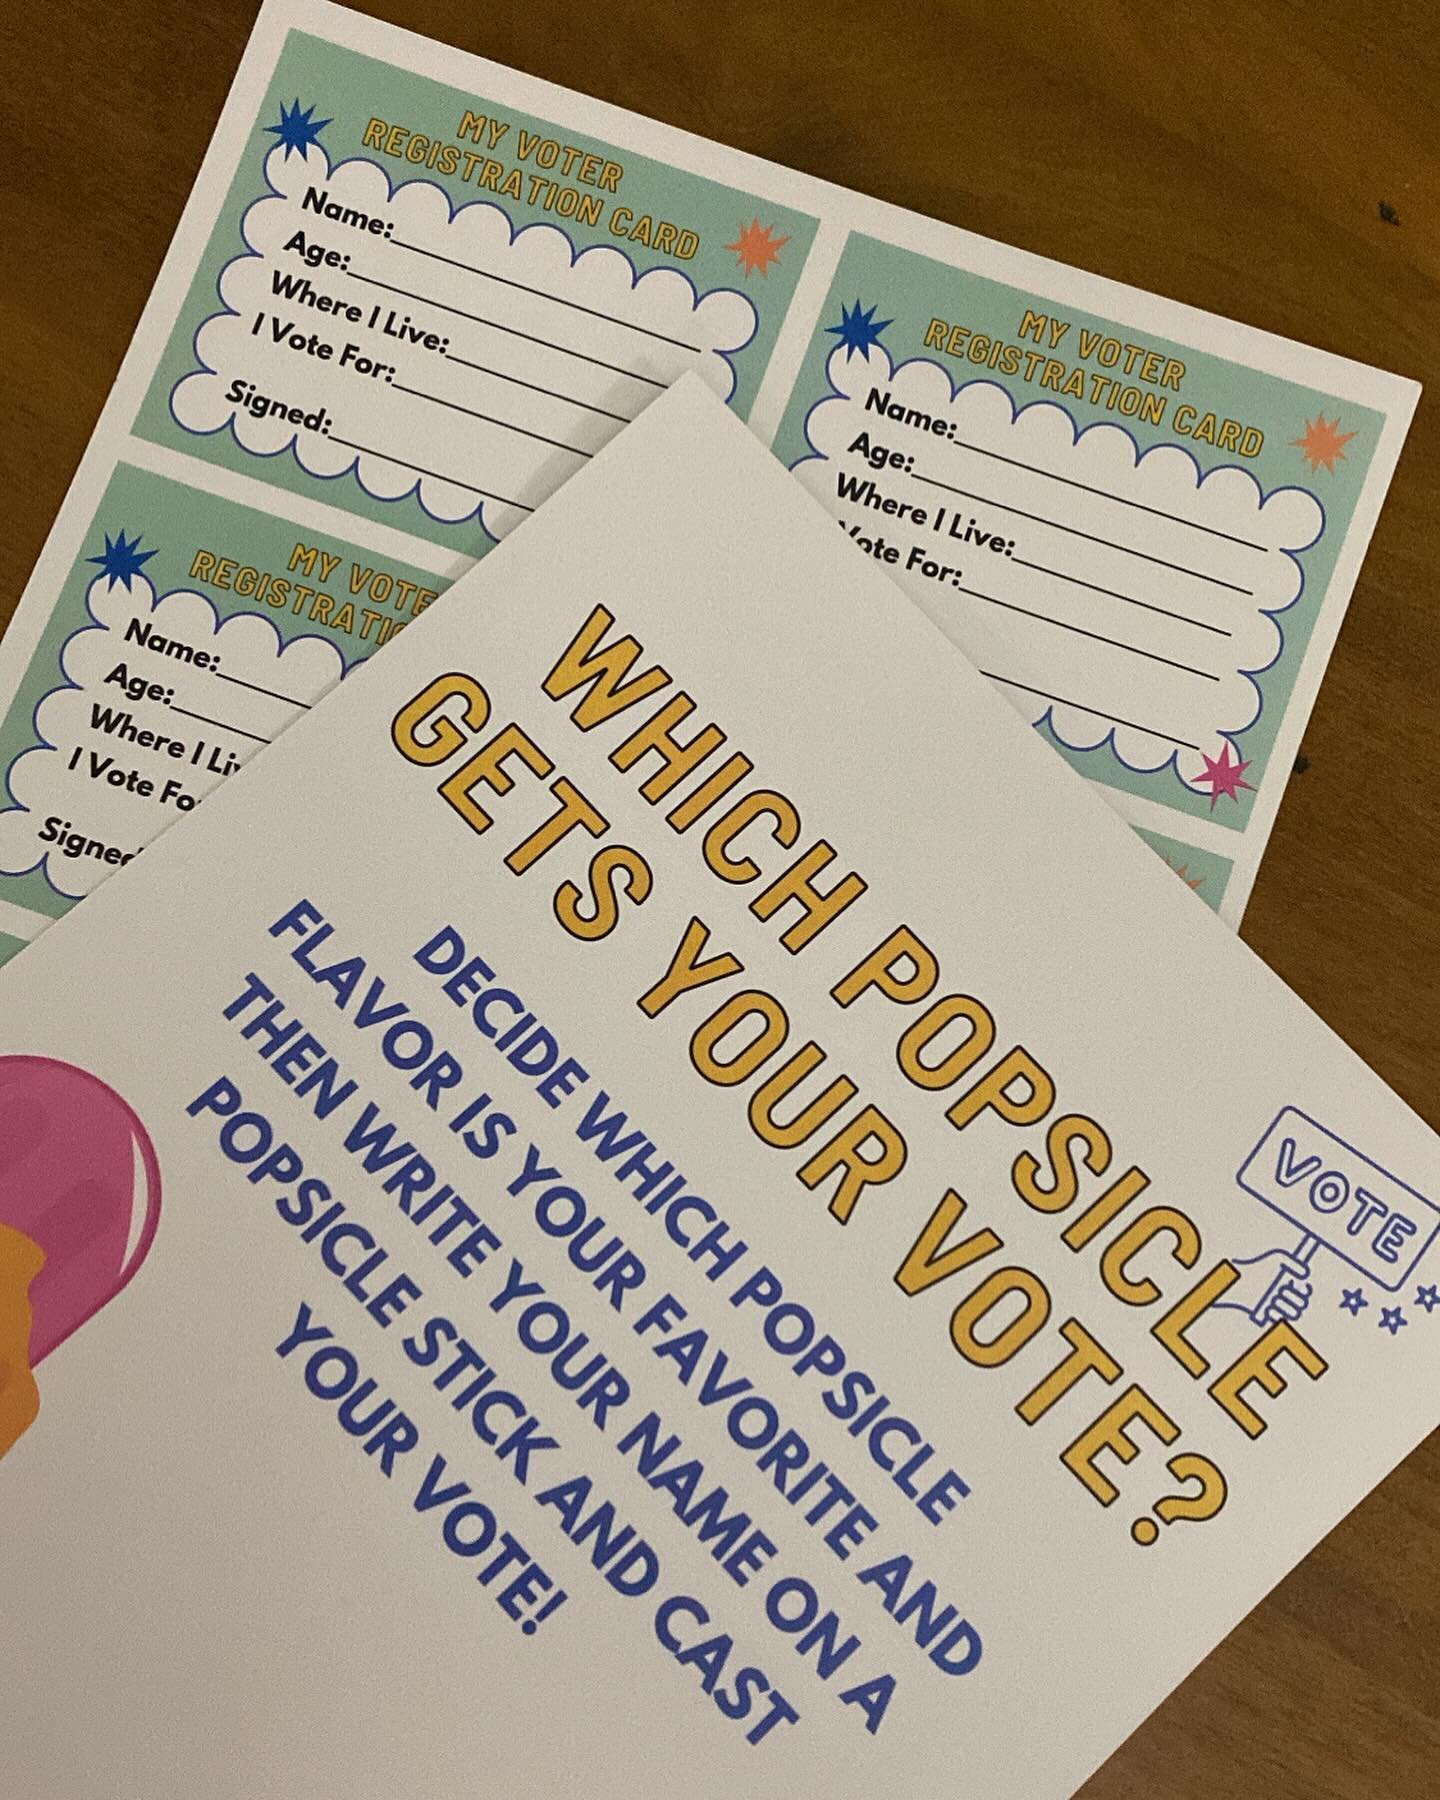 You&rsquo;re never too young (or old) to participate in civic activities, voting and celebrating democracy. 🎉 

Here&rsquo;s a sneak peak at one of our &ldquo;kids&rdquo; activities for tomorrow (adults, we&rsquo;ve got pops for you too!). 

Come jo